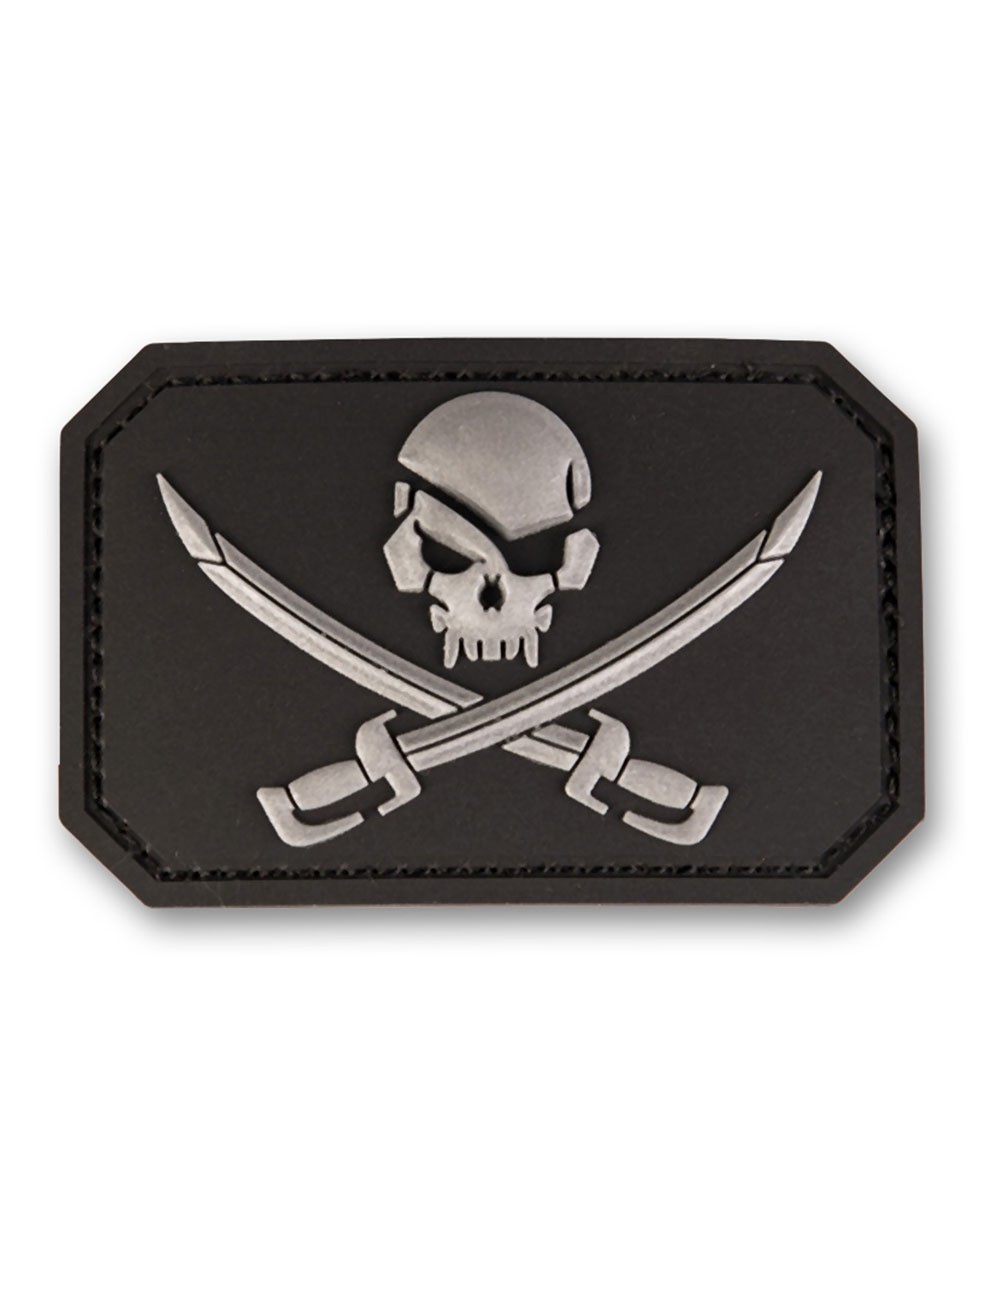 3D PVC Patch 16832202 Pirate Sale Roger Skull Jolly Swords With